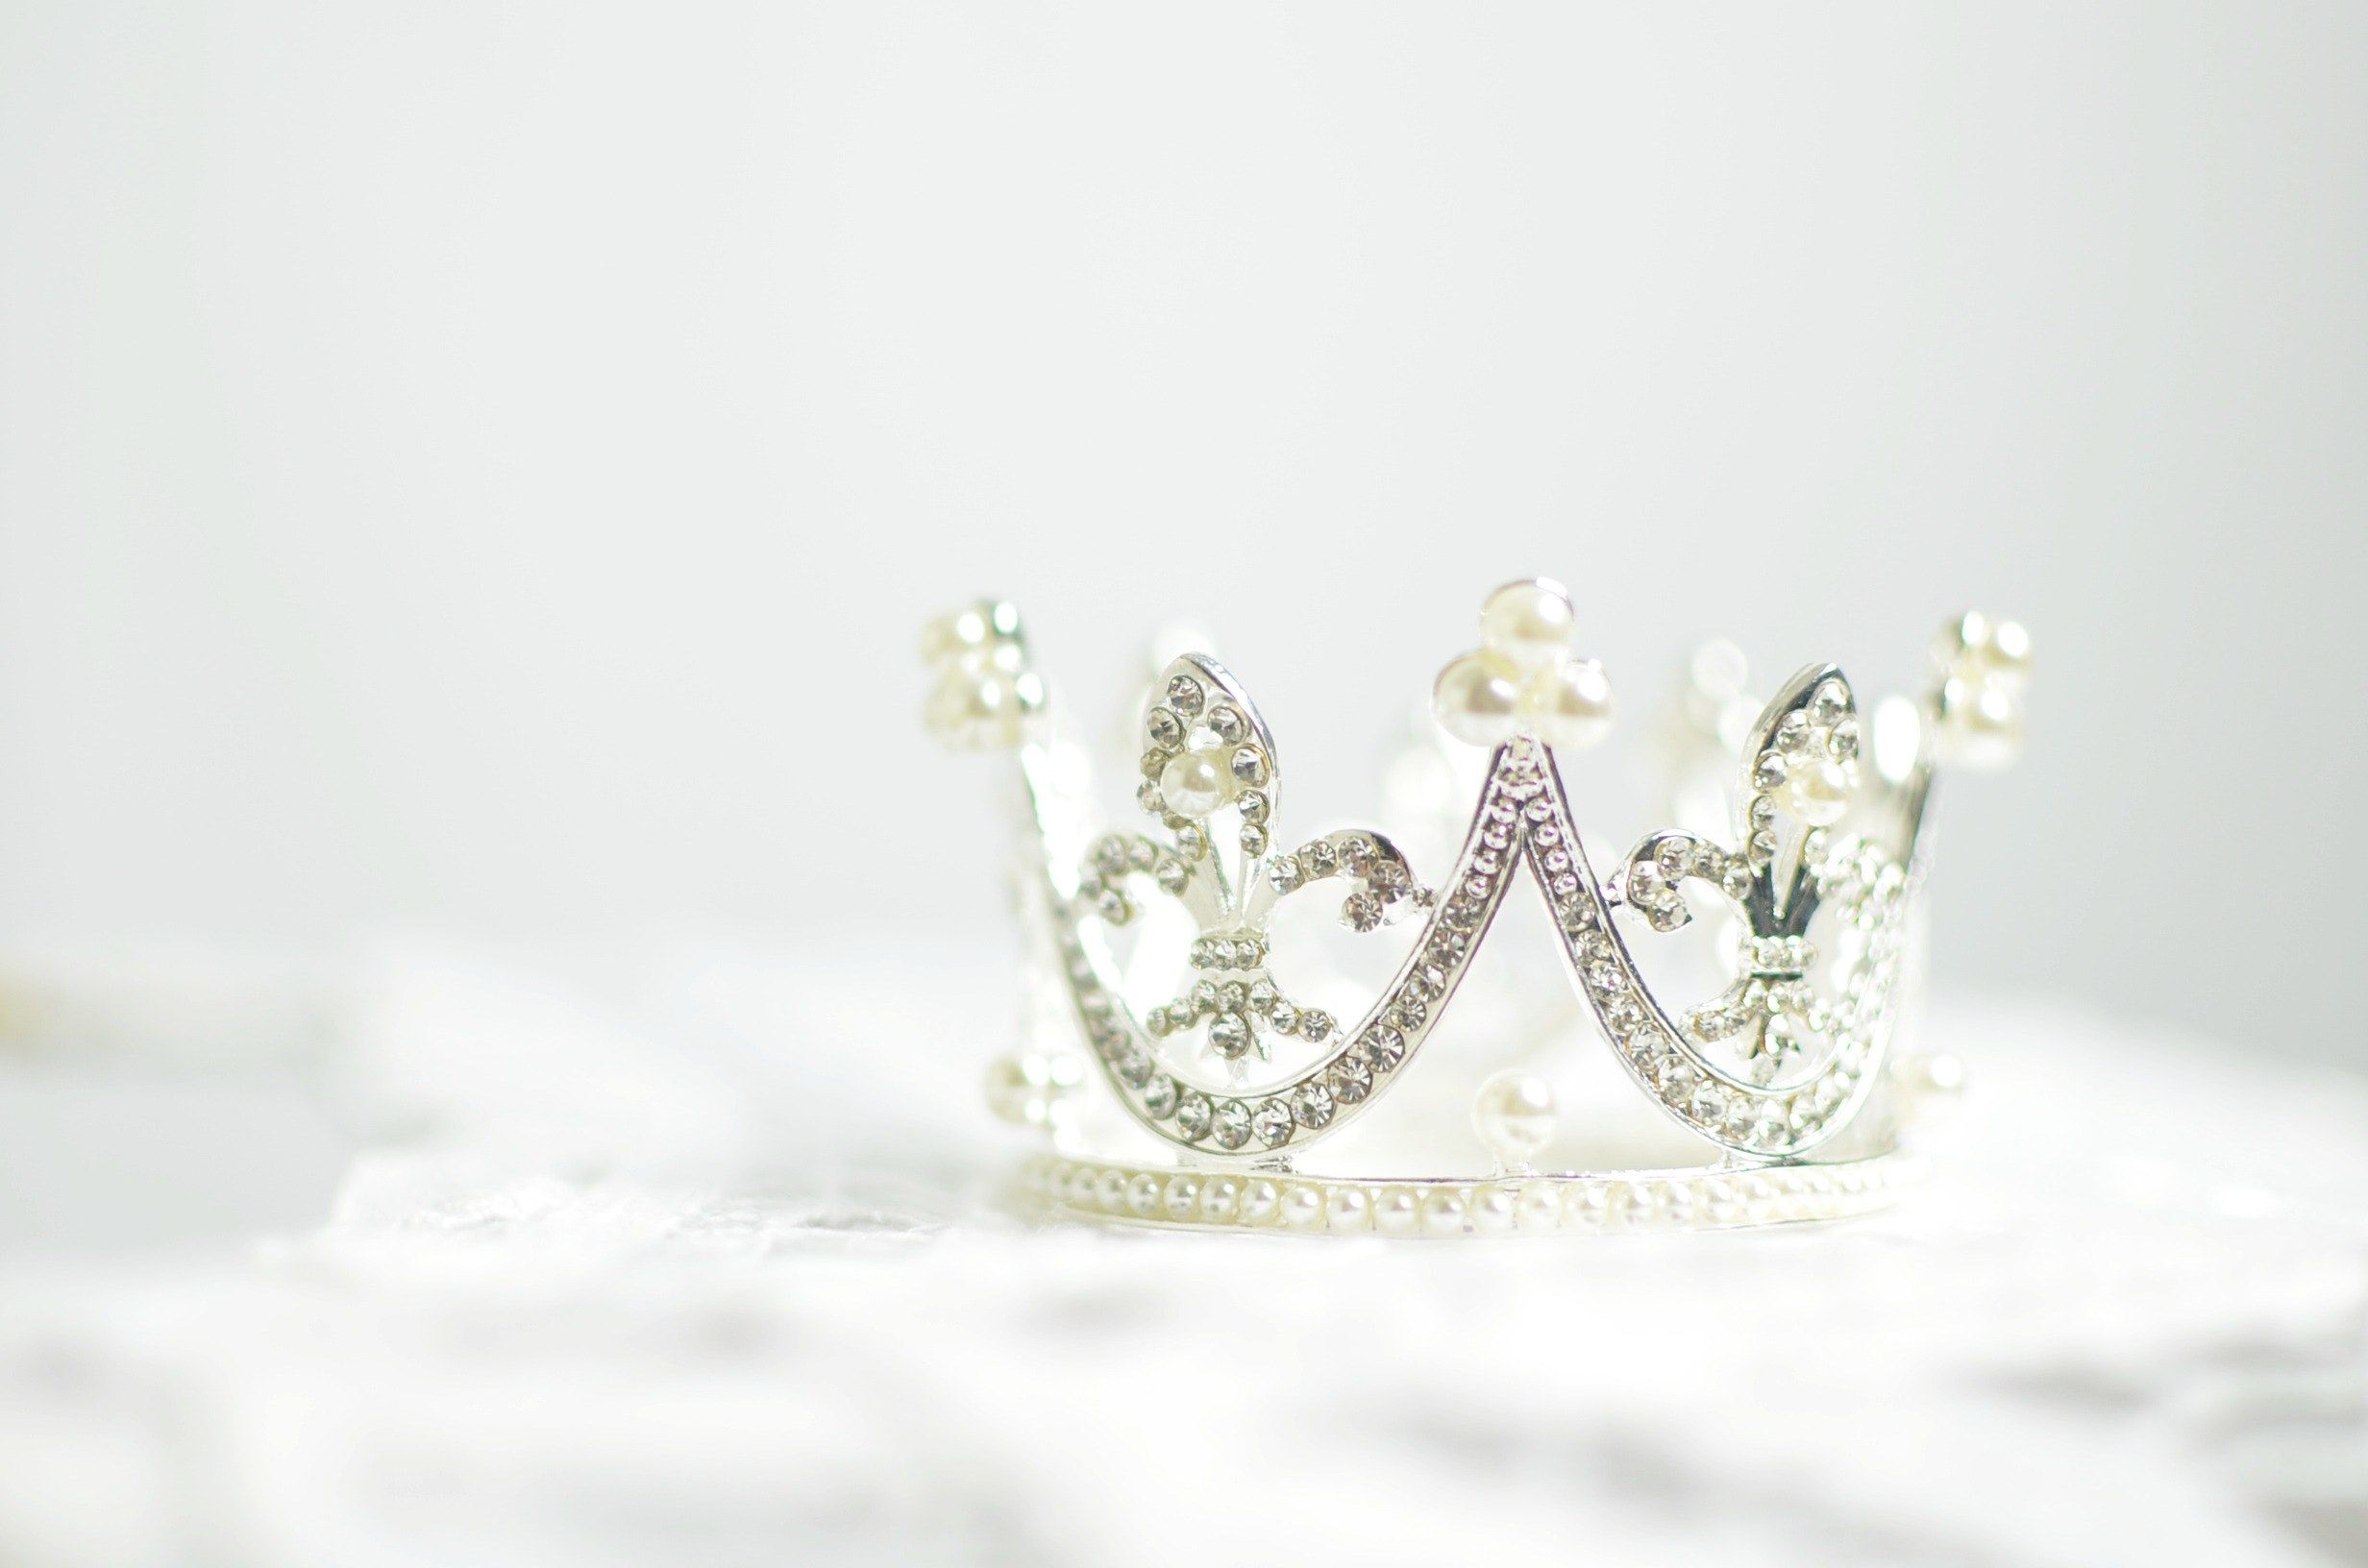 crown silver white and diamond HD wallpaper and background